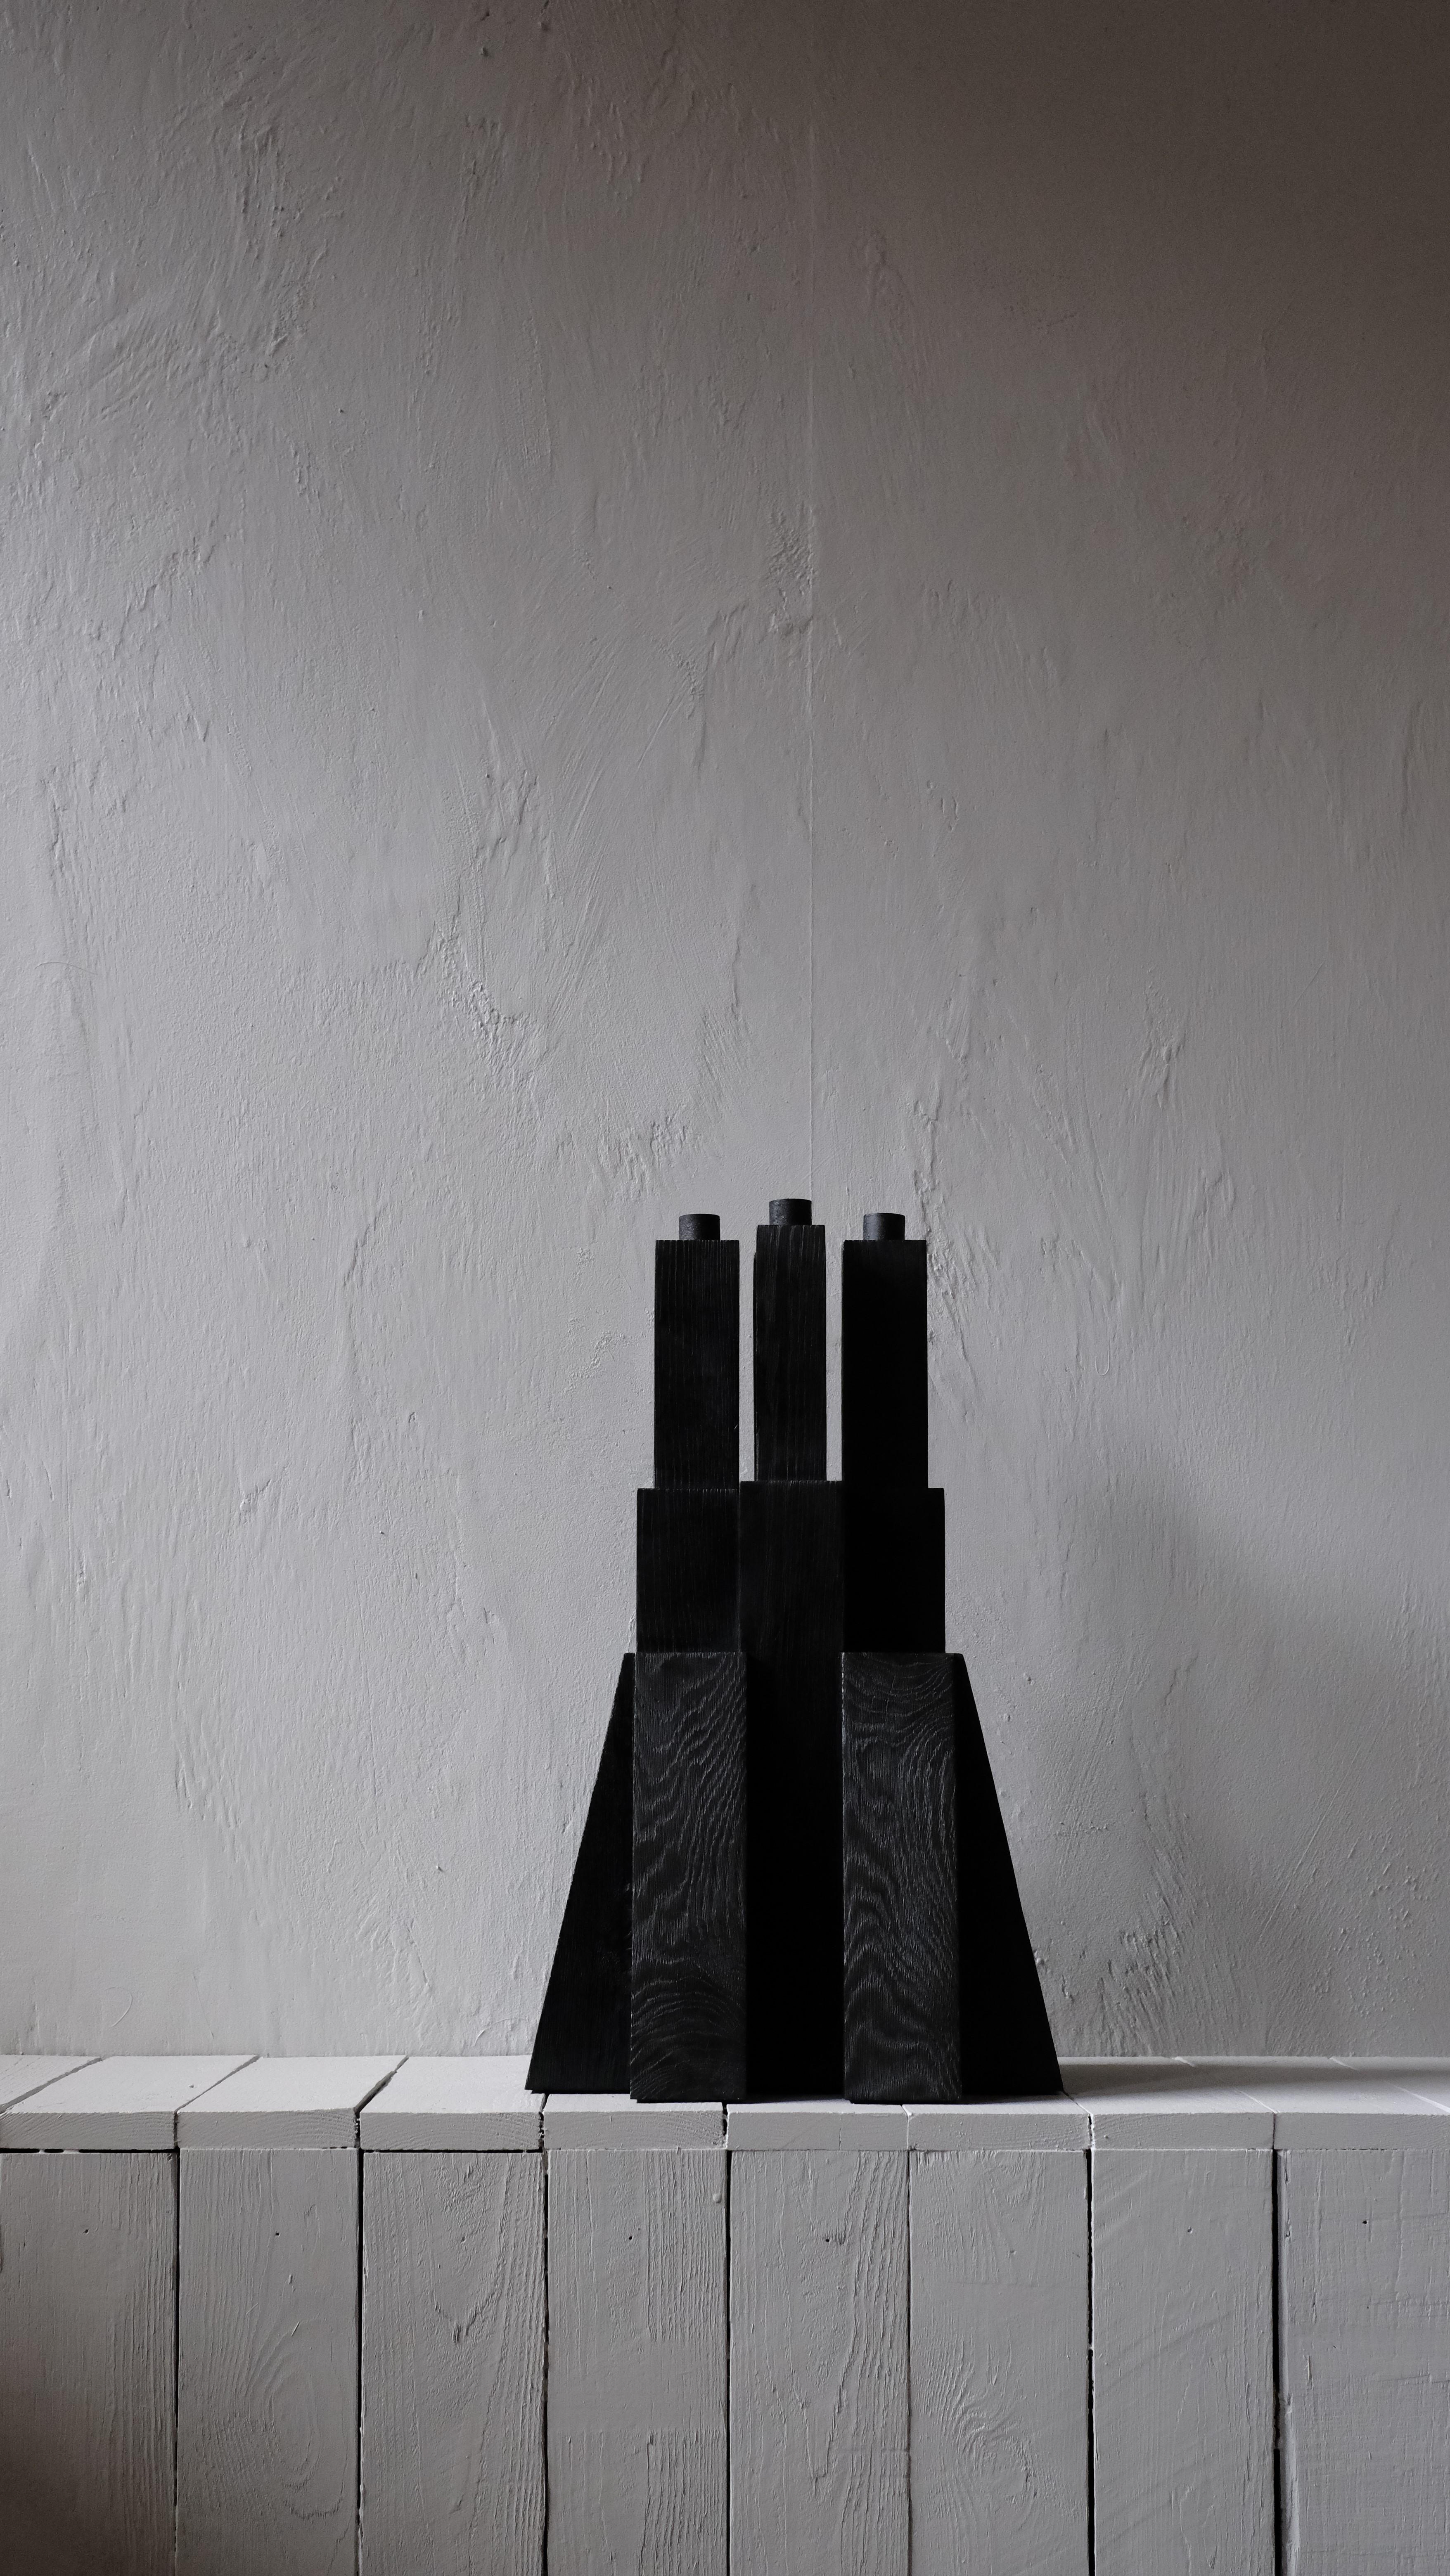 Bunker Candleholder 2.0 by Arno Declercq
Dimensions: W 32 x L 32 x H 52 cm 
Materials: Burned and waxed oak

Arno Declercq
Belgian designer and art dealer who makes bespoke objects with passion for design, atmosphere, history and Craft. Arno grew up